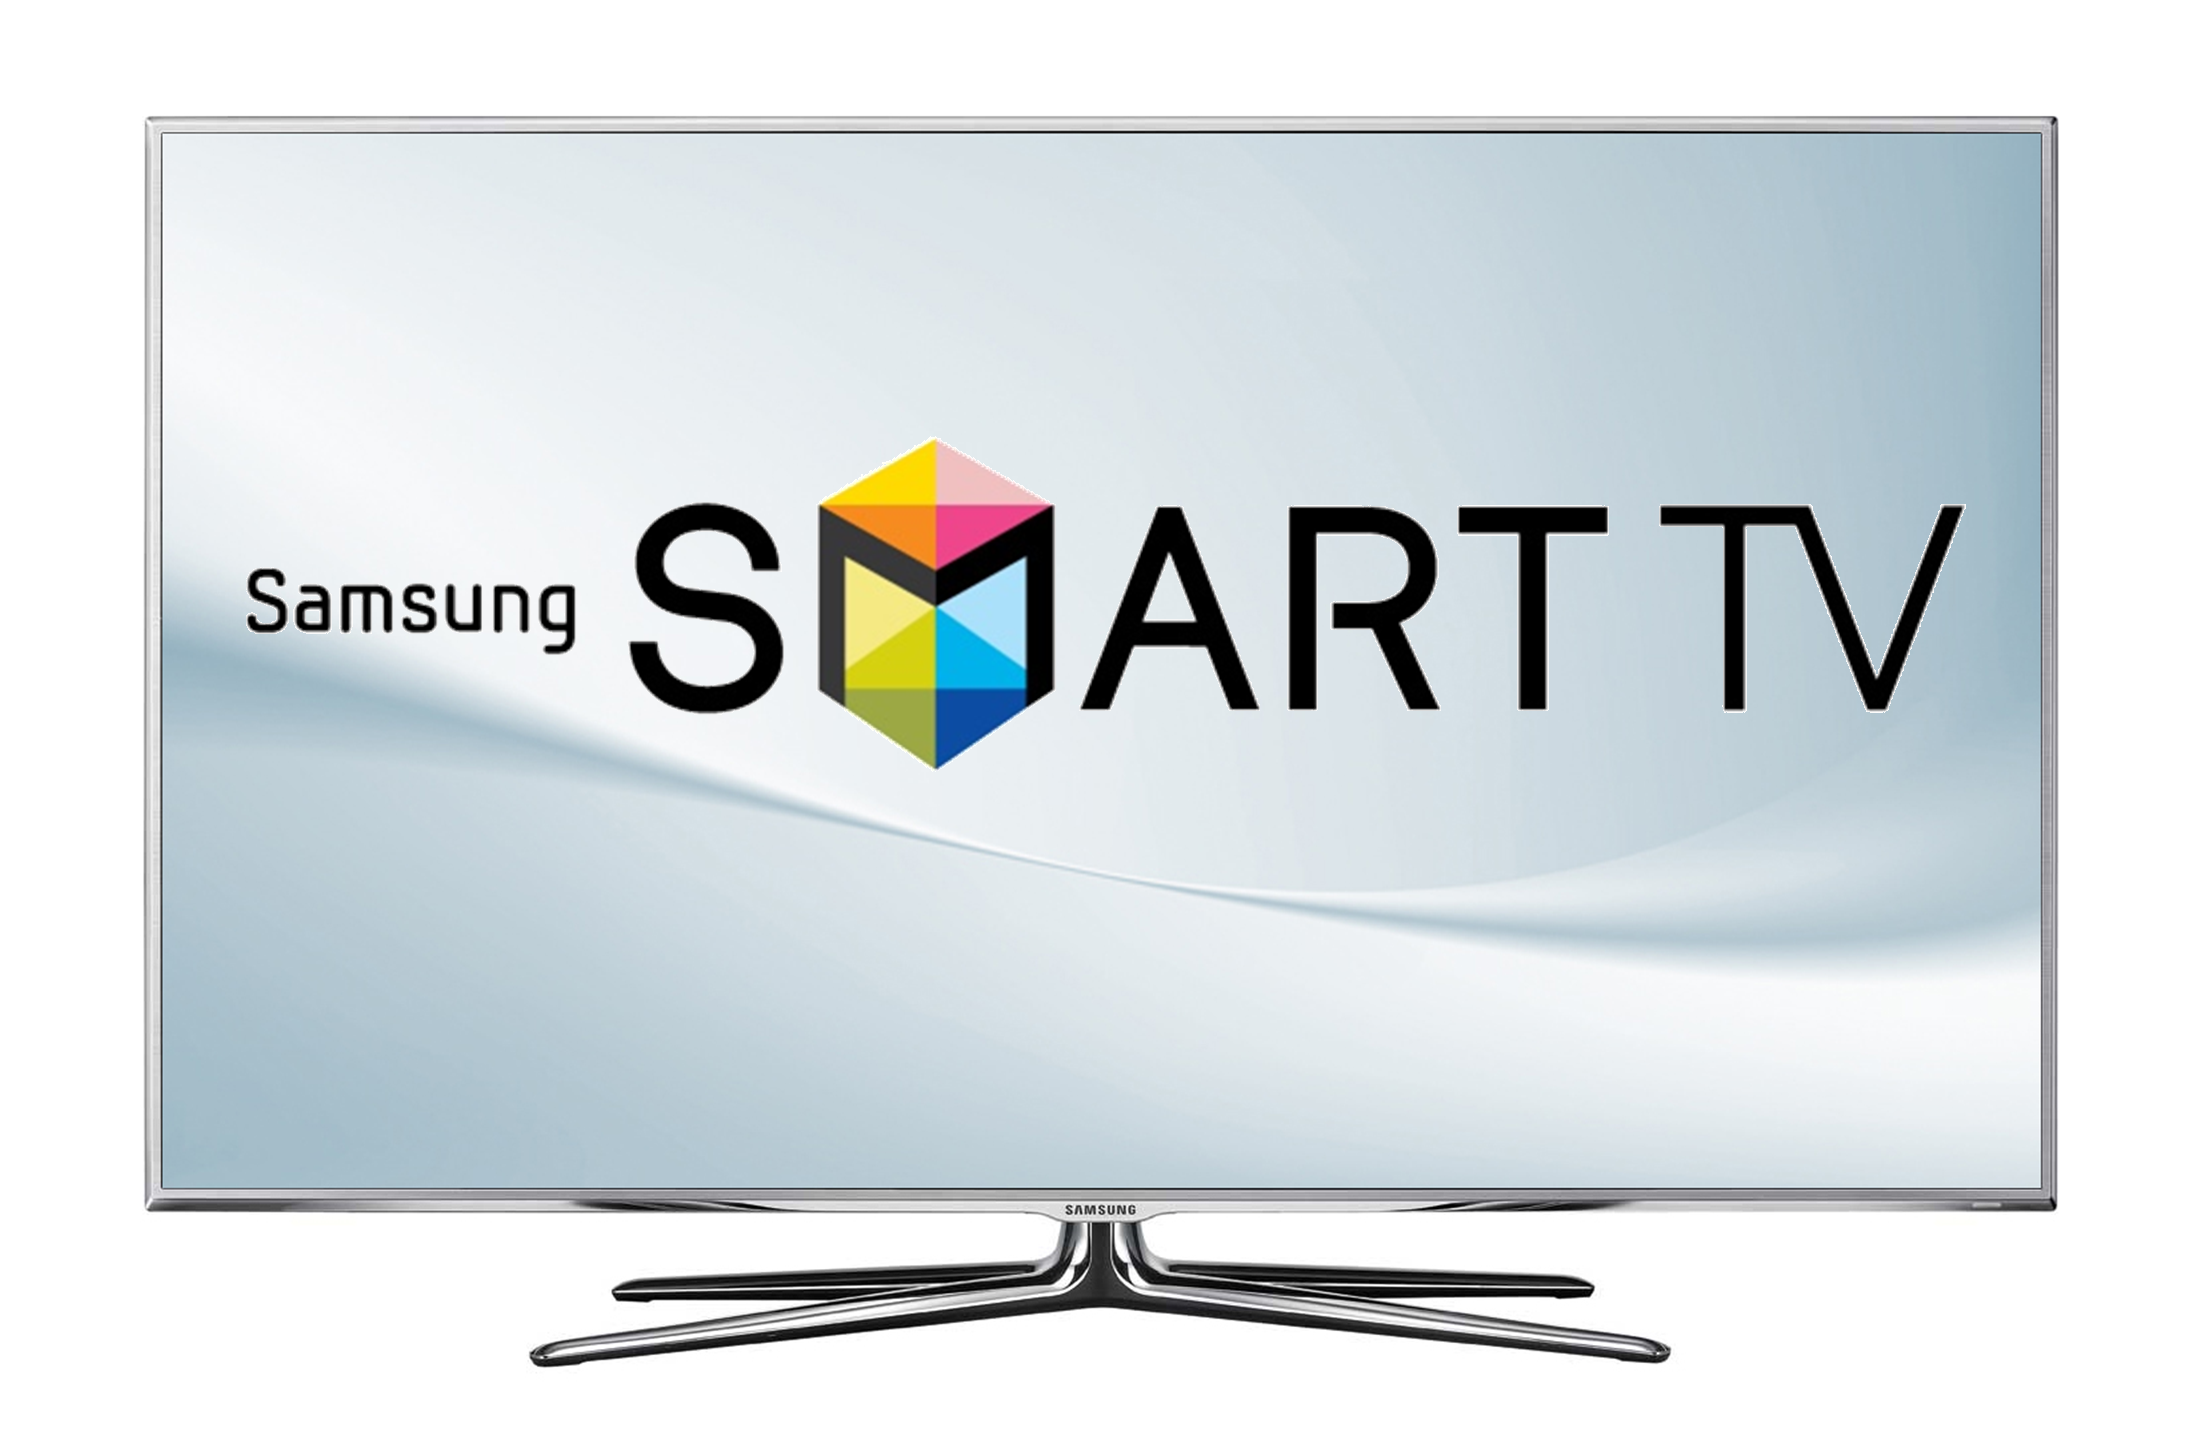 Samsung TVs Pushing Ads Into Foxtel App Streams By Accident